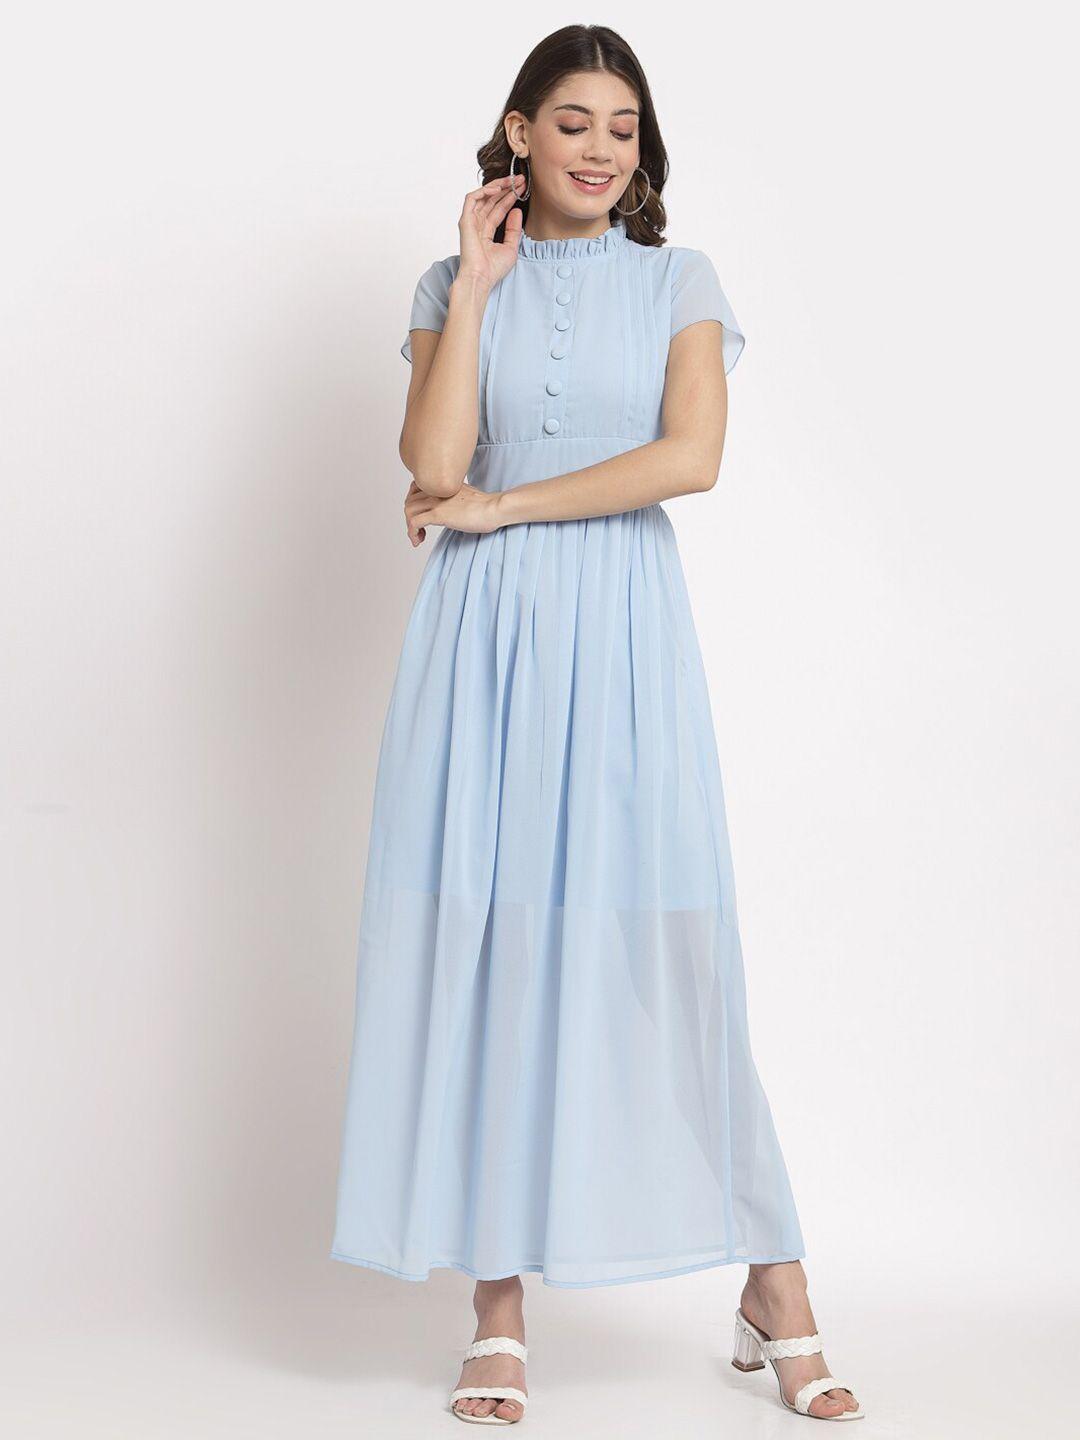 aayu turquoise blue georgette maxi dress